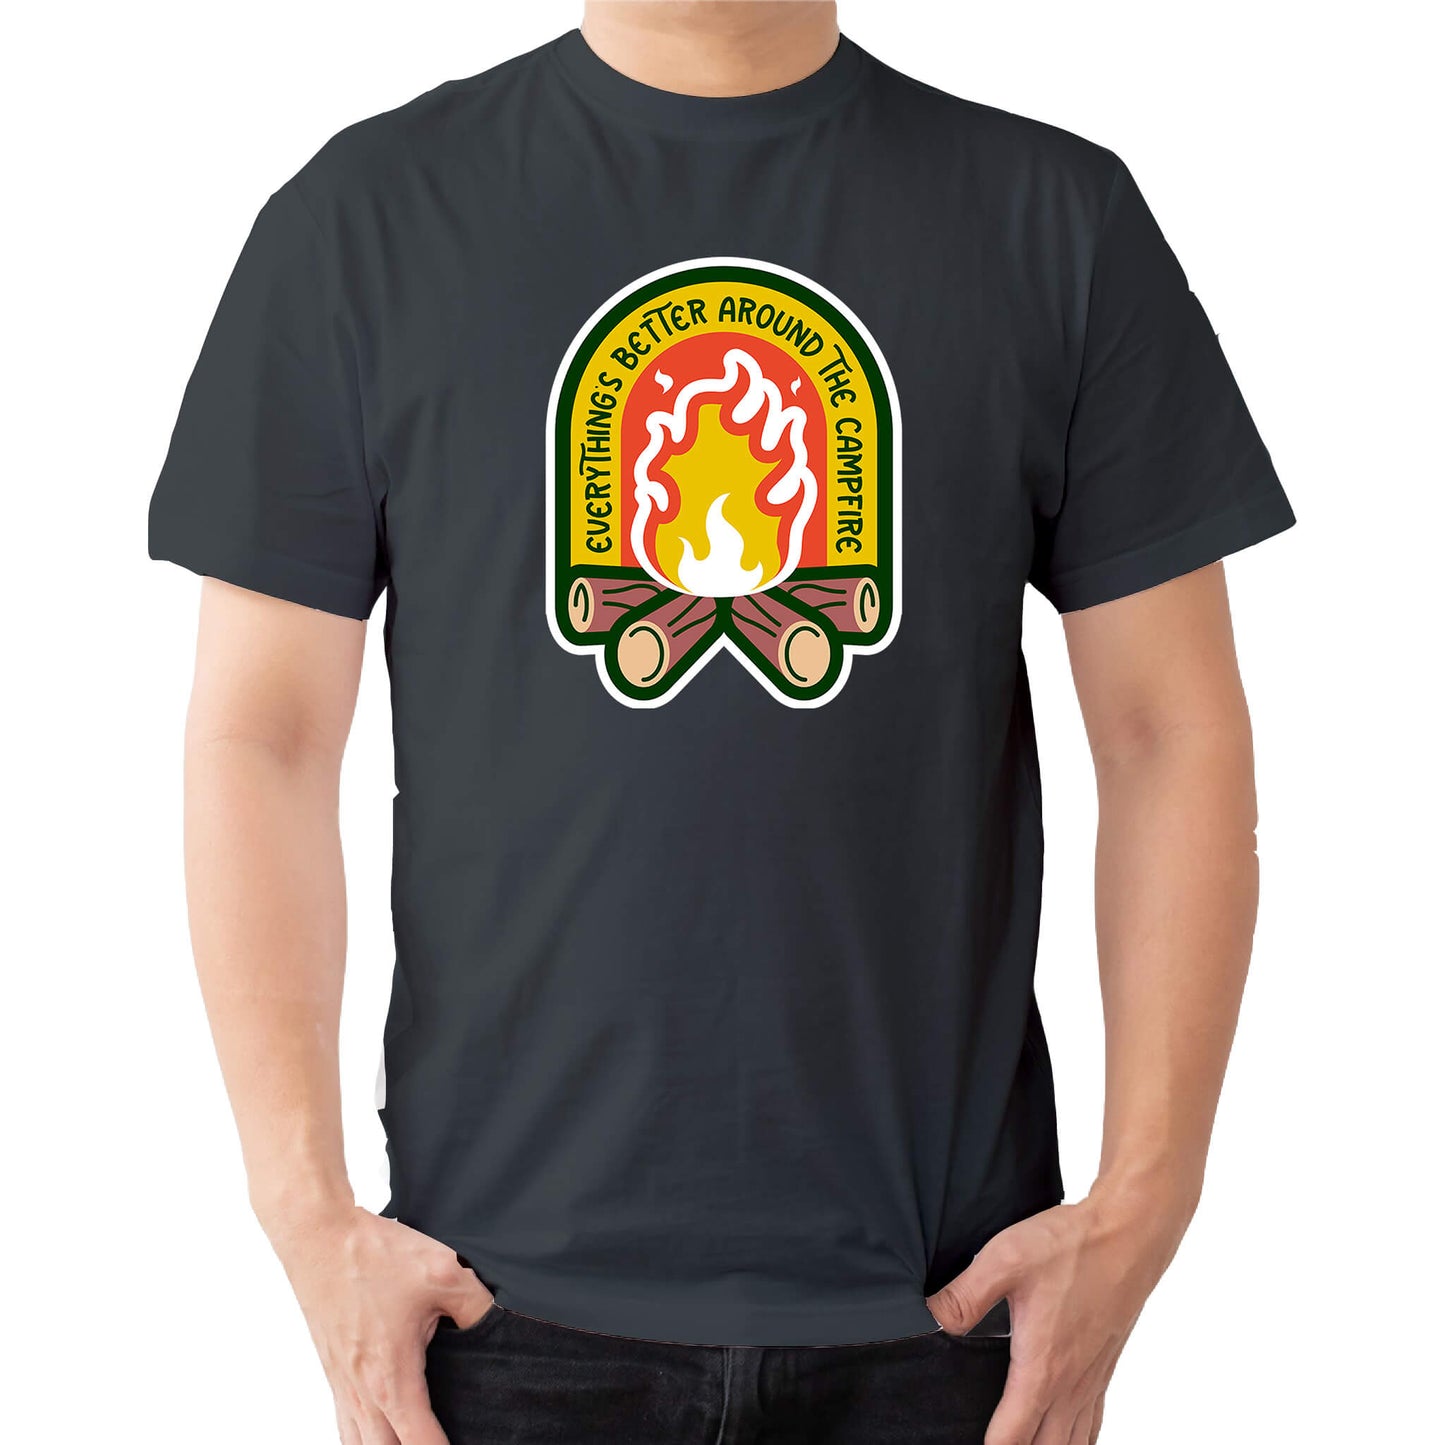 "Charcoal Cozy tee featuring a campfire image, perfect for outdoor enthusiasts. Text says: 'Everything is better around the campfire.' Embrace the warmth and camaraderie!"